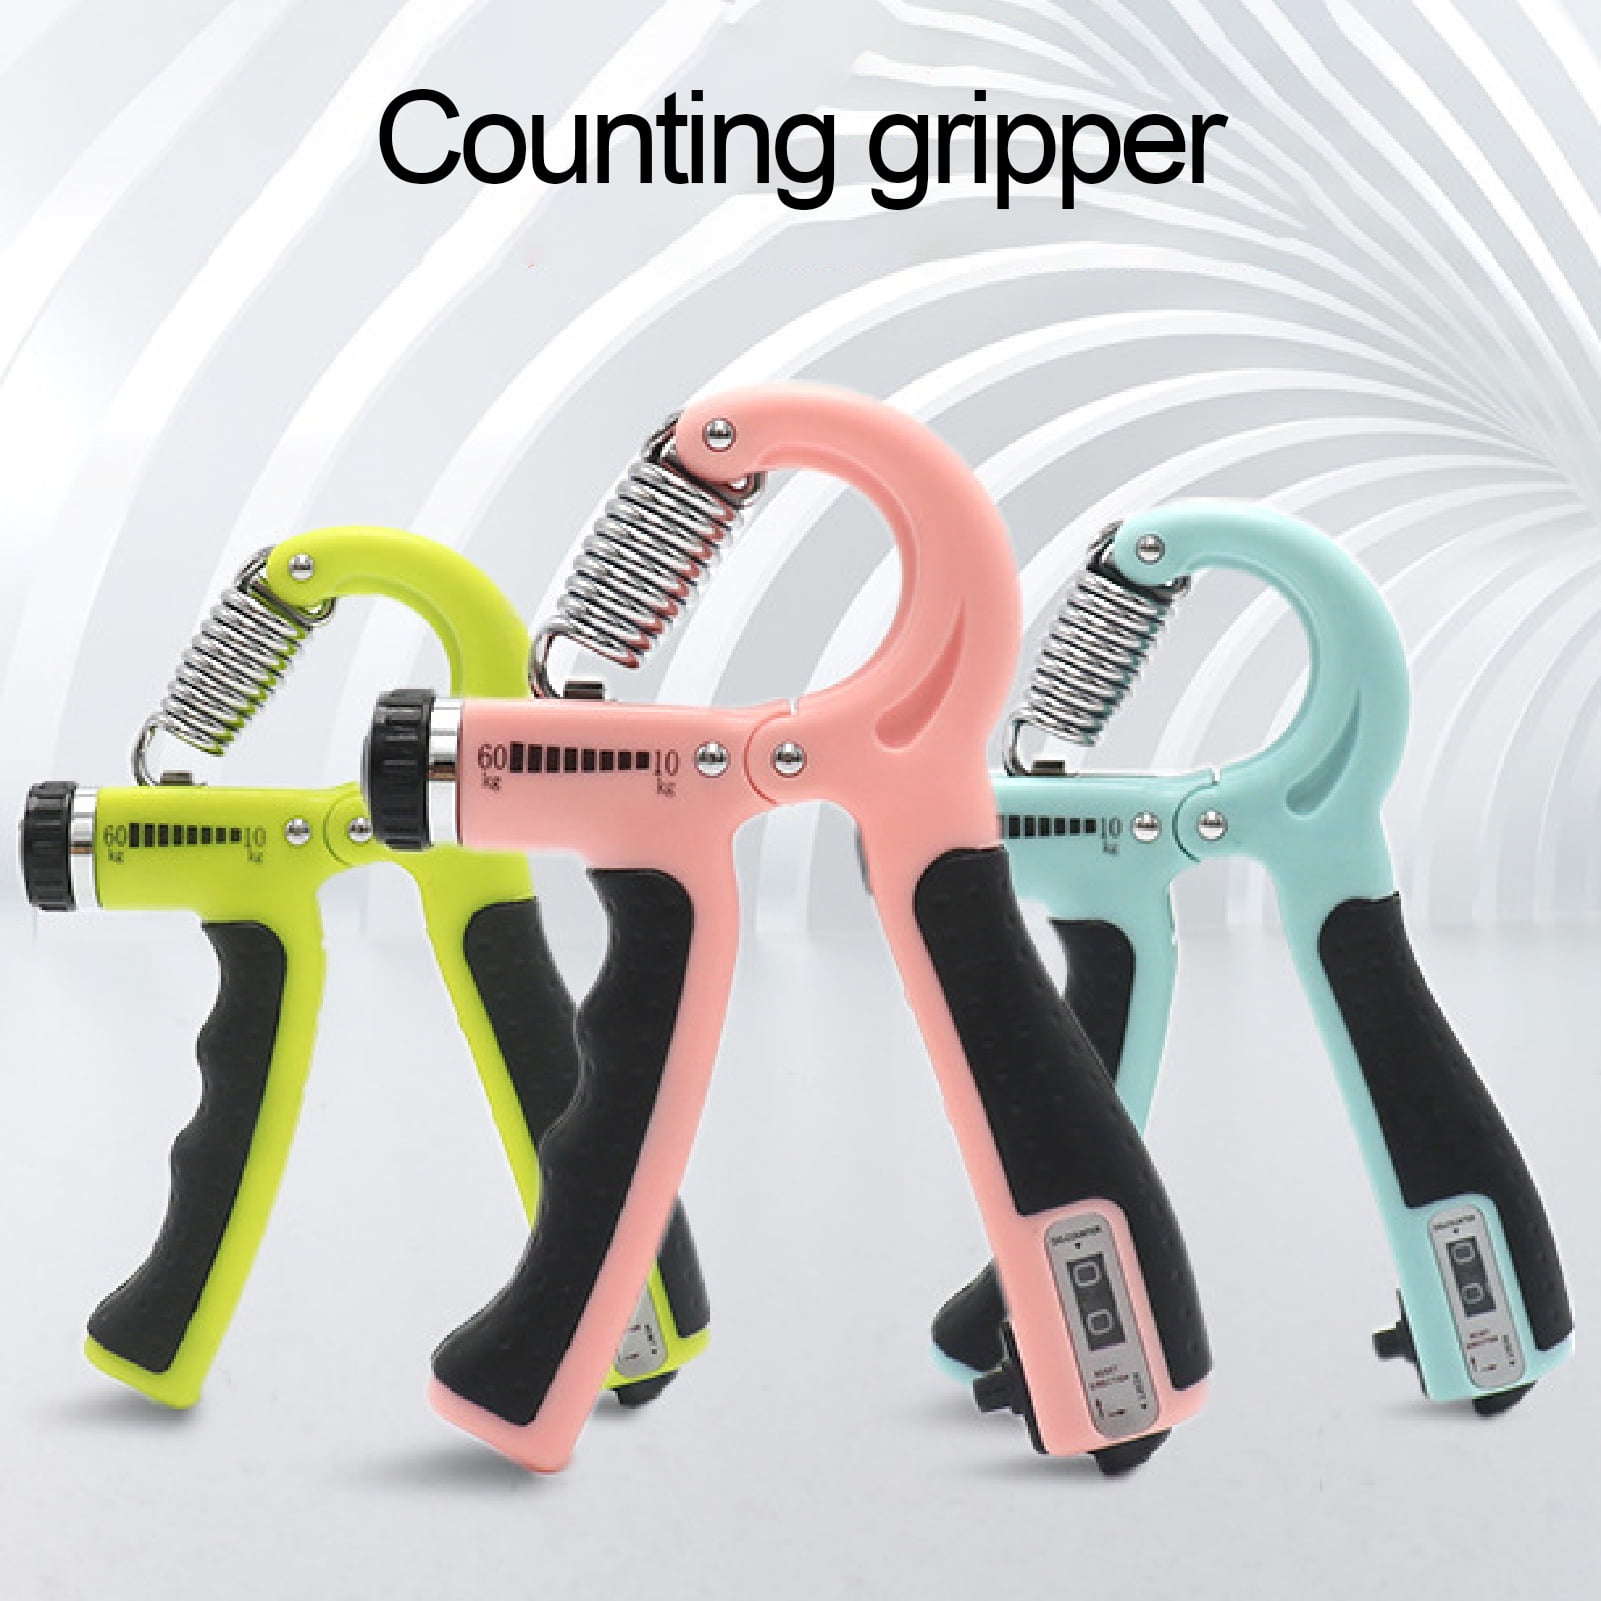 Hand Grip Strengthener and Grip Rings with 10-100lb Resistance This Forearm Grip Workout is The Best Hand Exerciser Grip Strengthener for Carpal Tunnel Grip Strength Trainer and Hand Strengthener